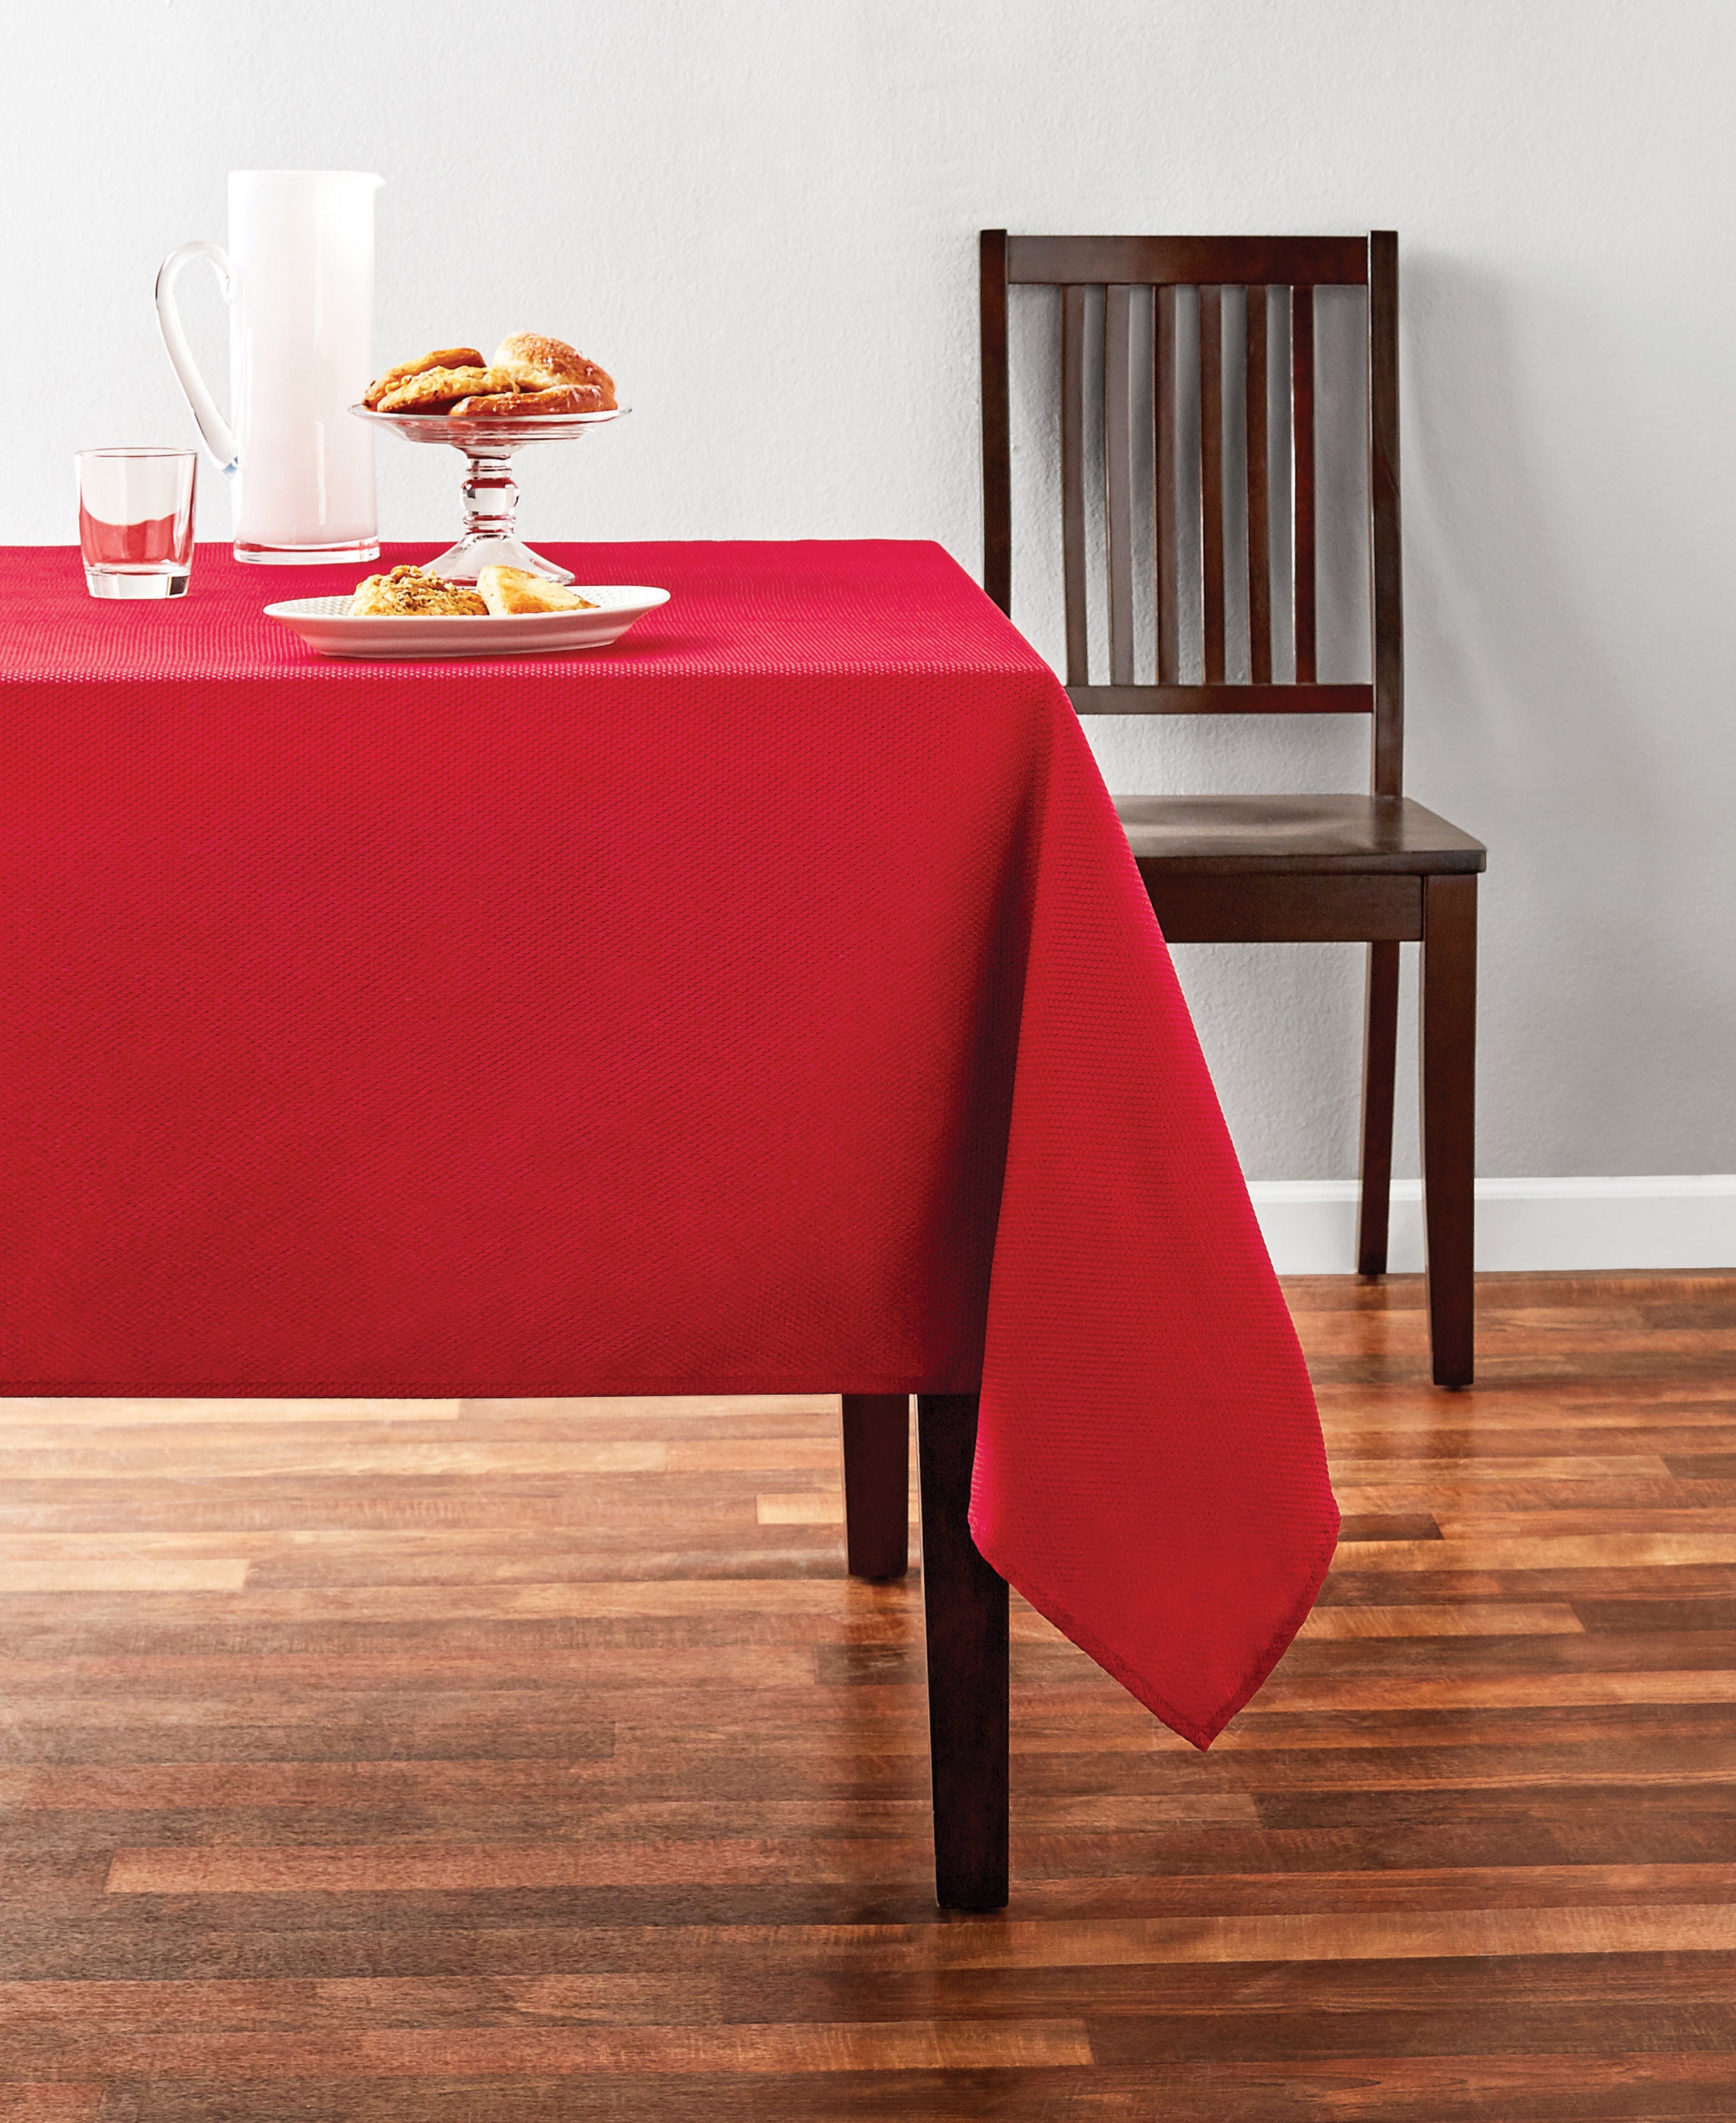 A red tablecloth on a table